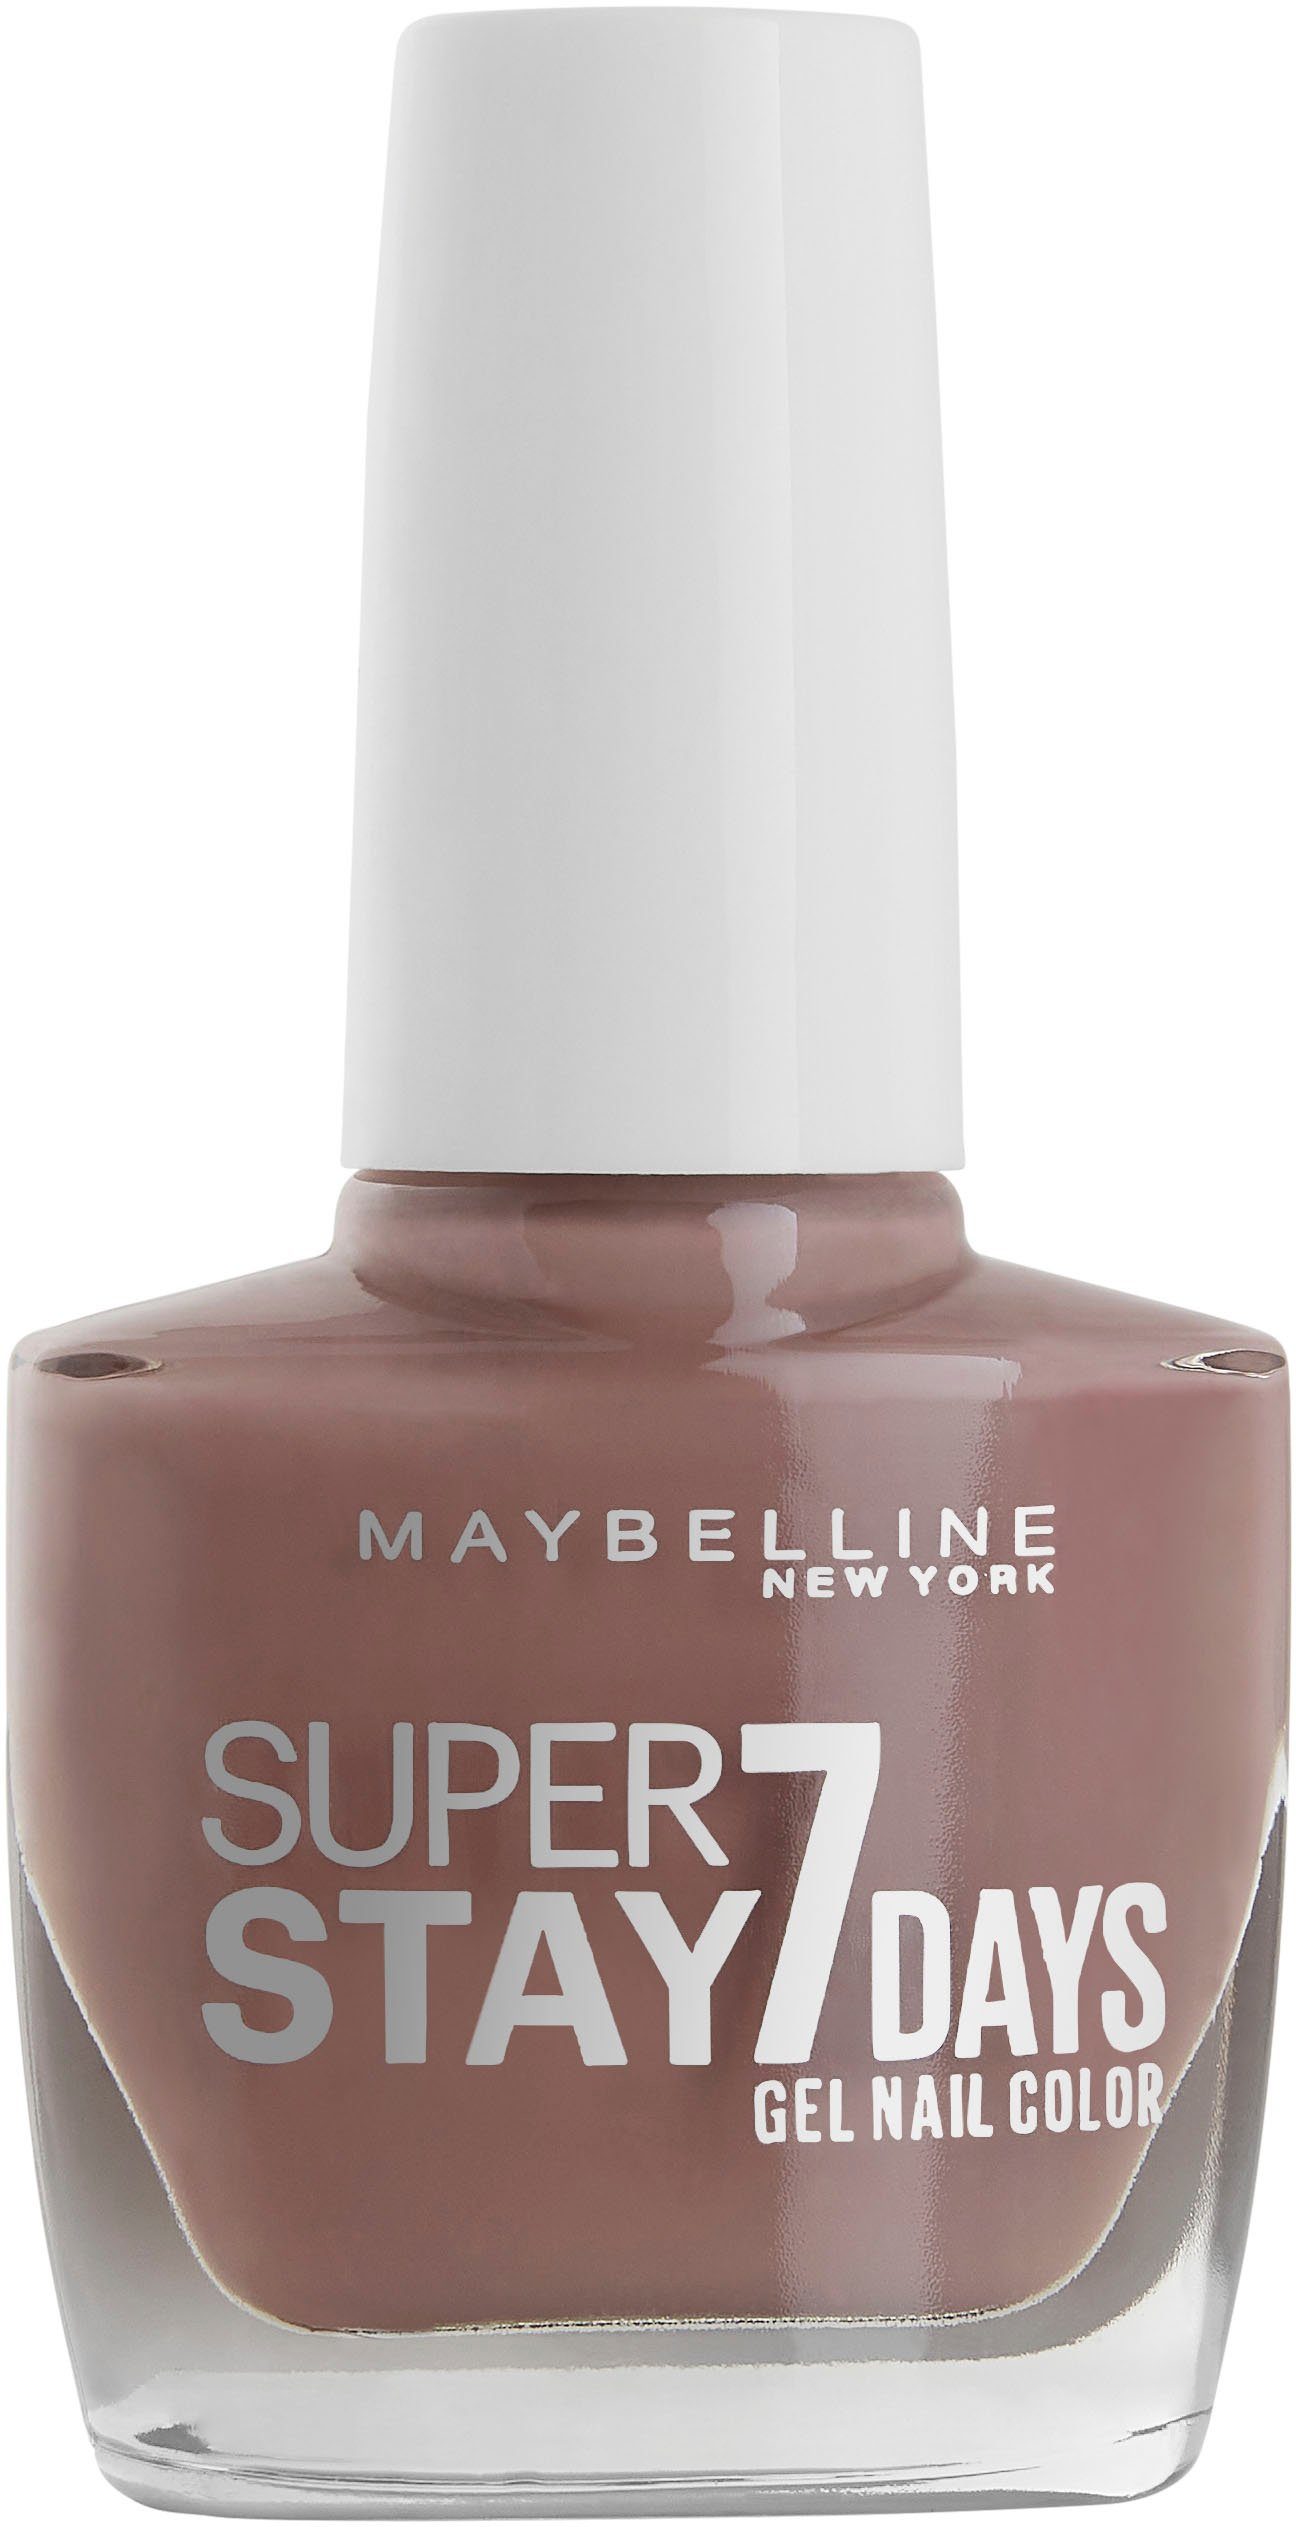 Nagellack Bare it 7 YORK MAYBELLINE Days NEW All Superstay 930 Nr.